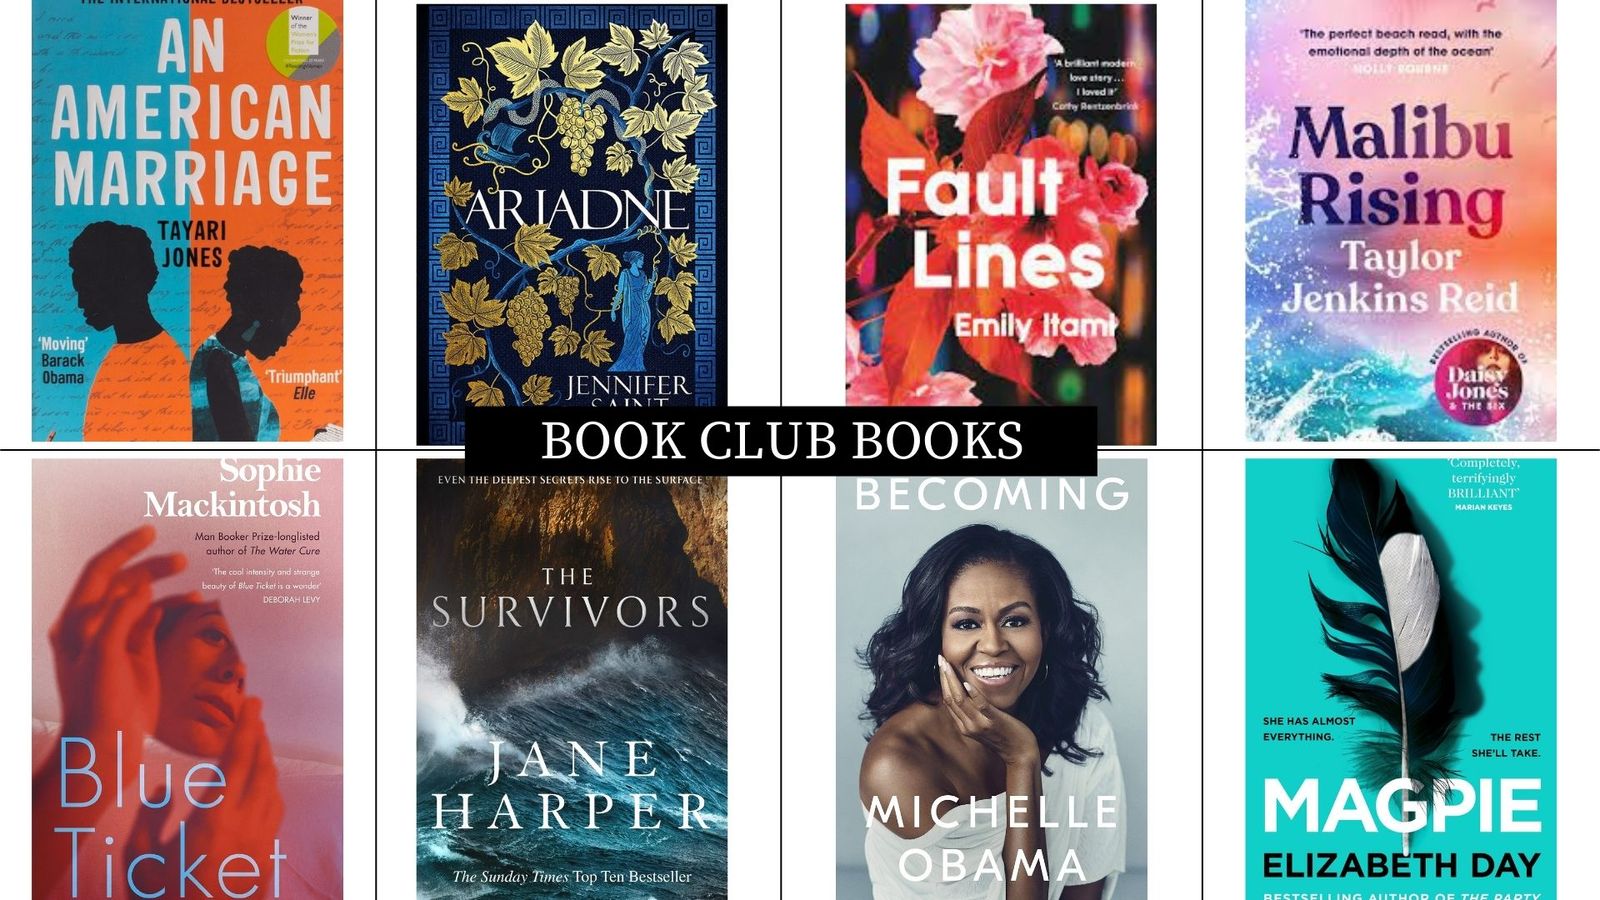 The best book club books to get the conversation flowing Woman & Home